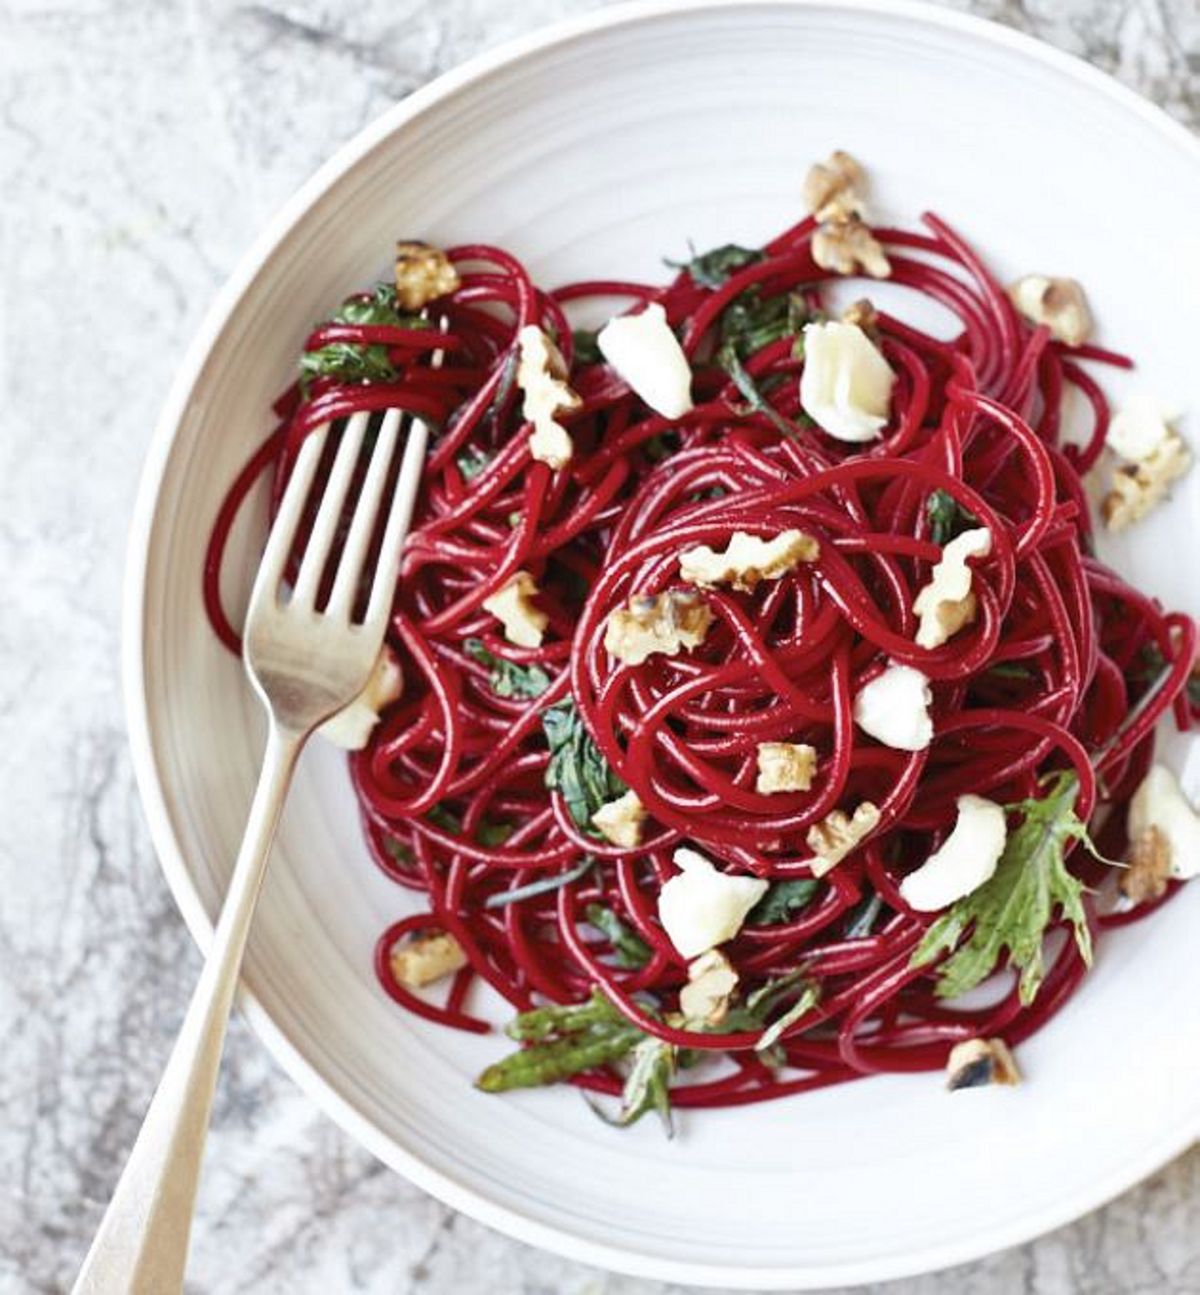 Beetroot Noodles with Goat’s Cheese, Toasted Walnuts and Baby Kale